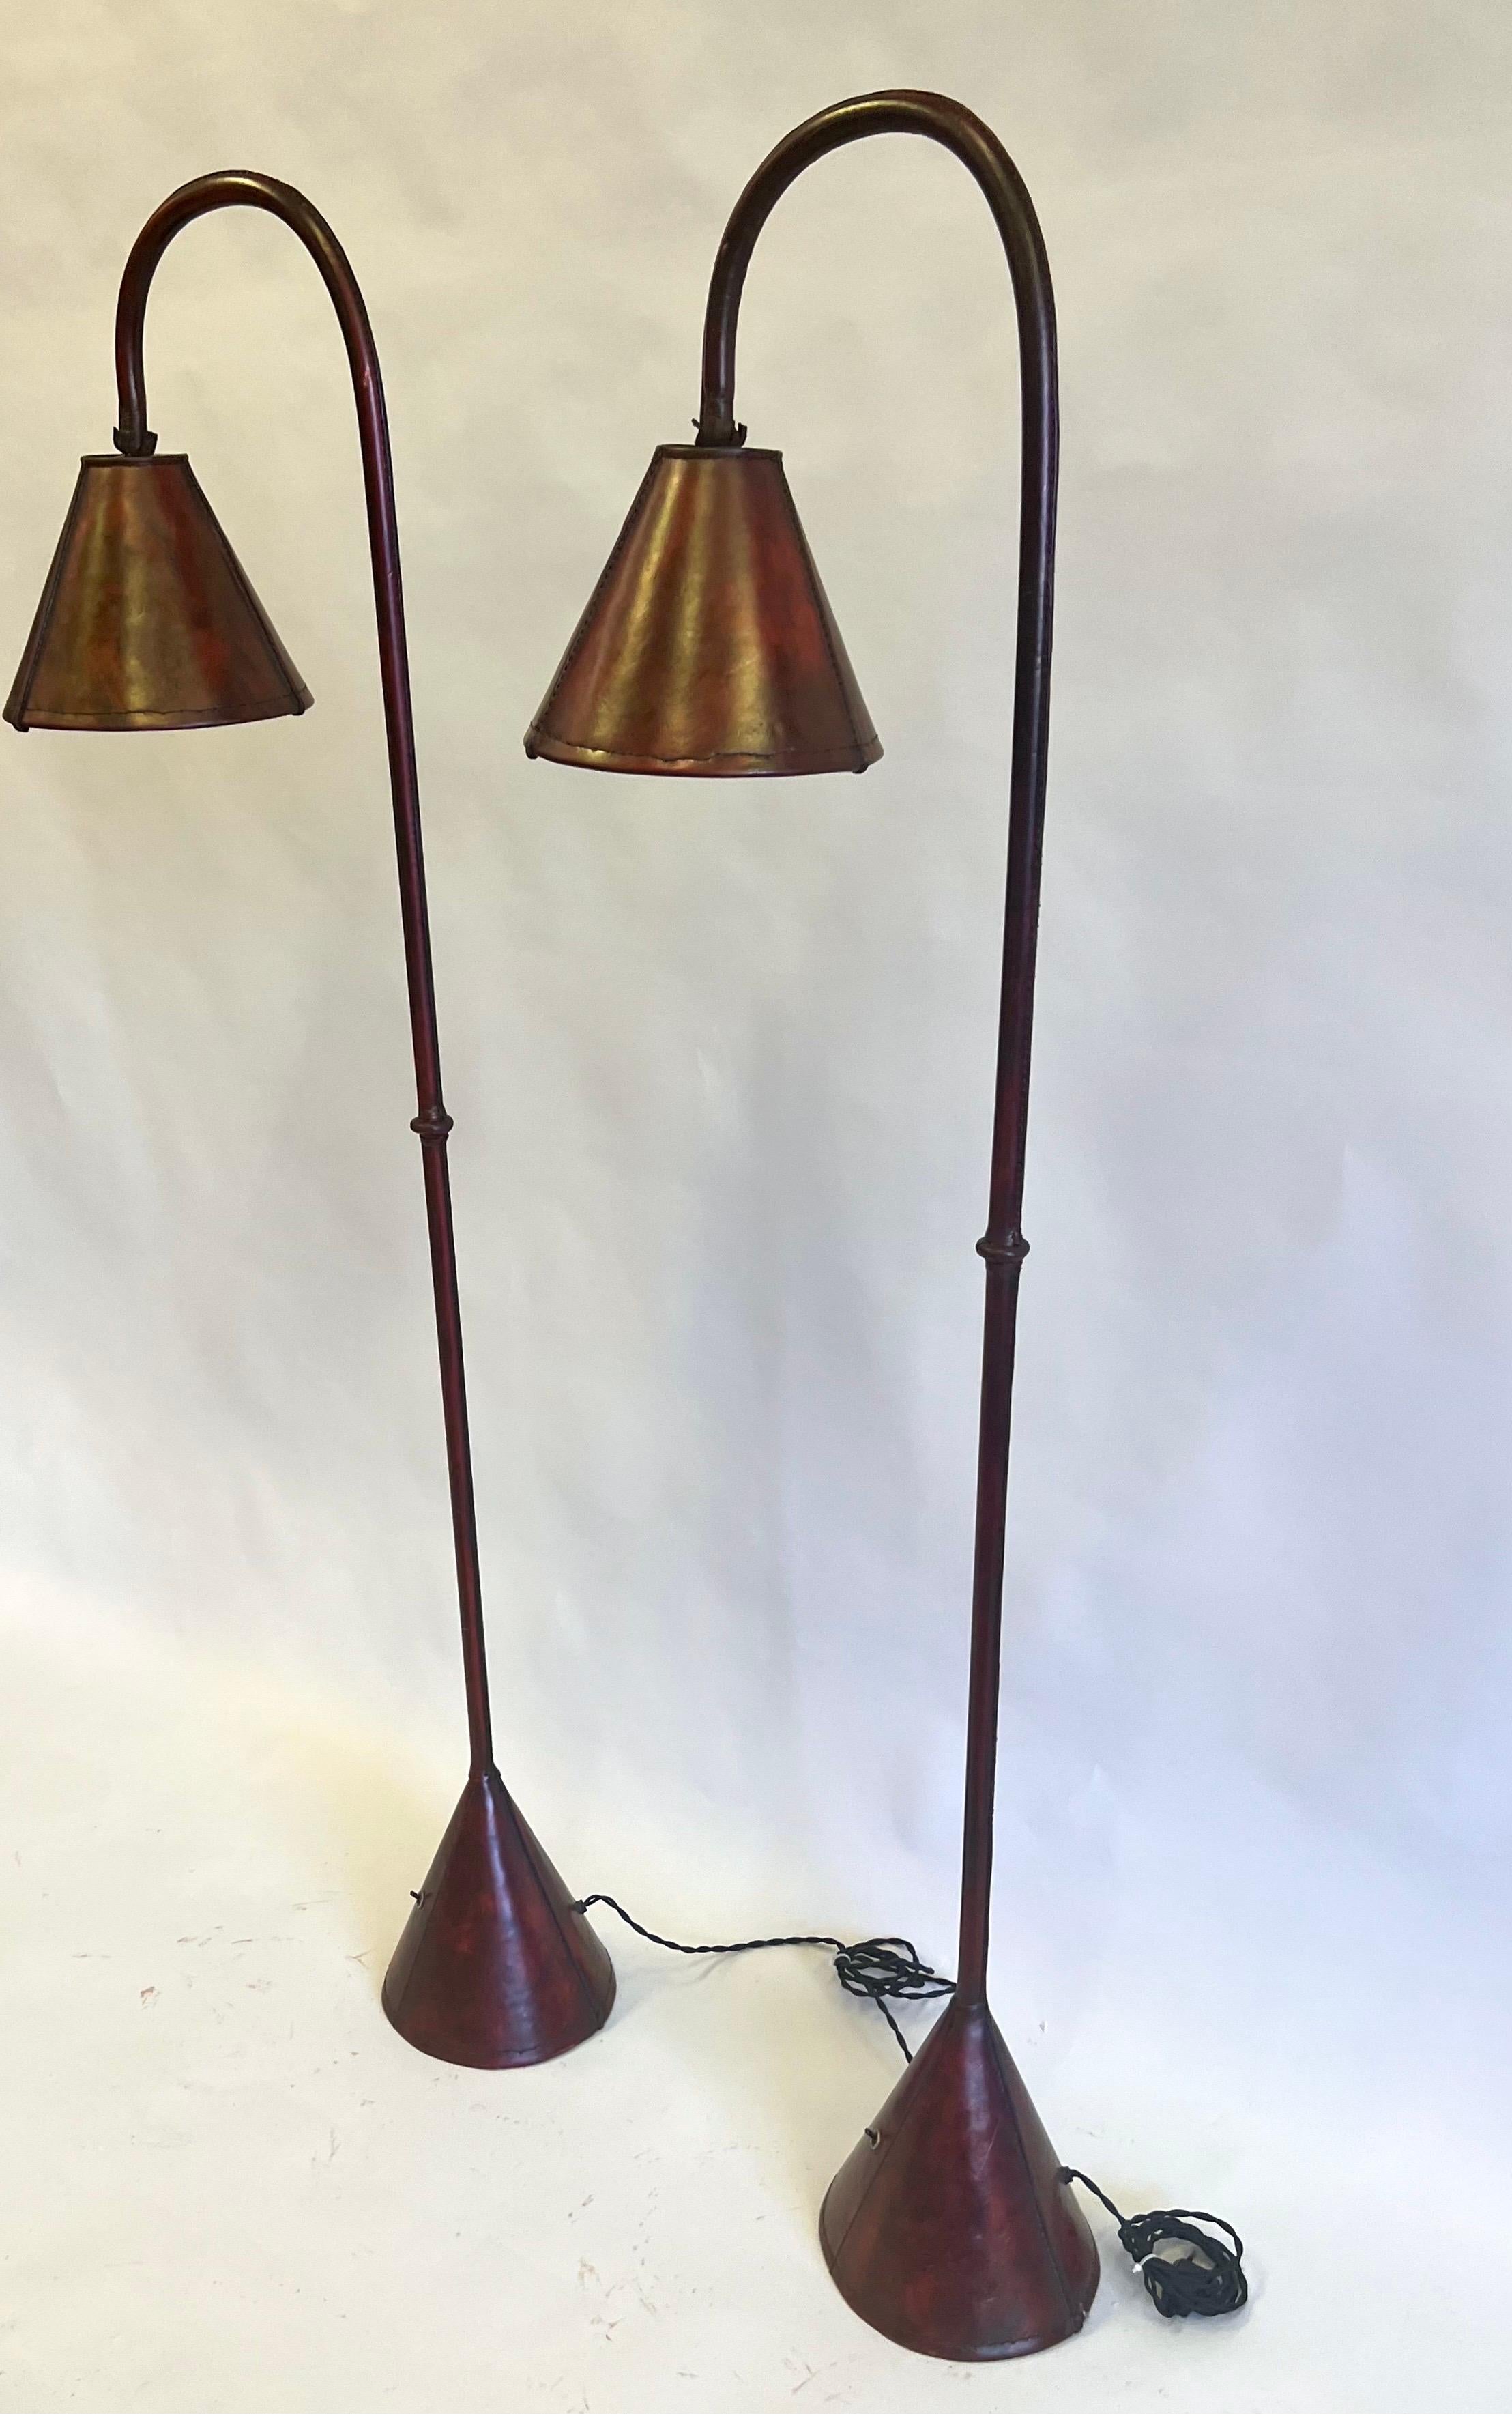 An Elegant Pair of French Midcentury Modern Floor Lamps in Hand Stitched Mottled Dark Red / Burgundy Leather by the French Master 20th Century Designer, Jacques Adnet circa 1955. This classic hand made model from the renowned French designer,